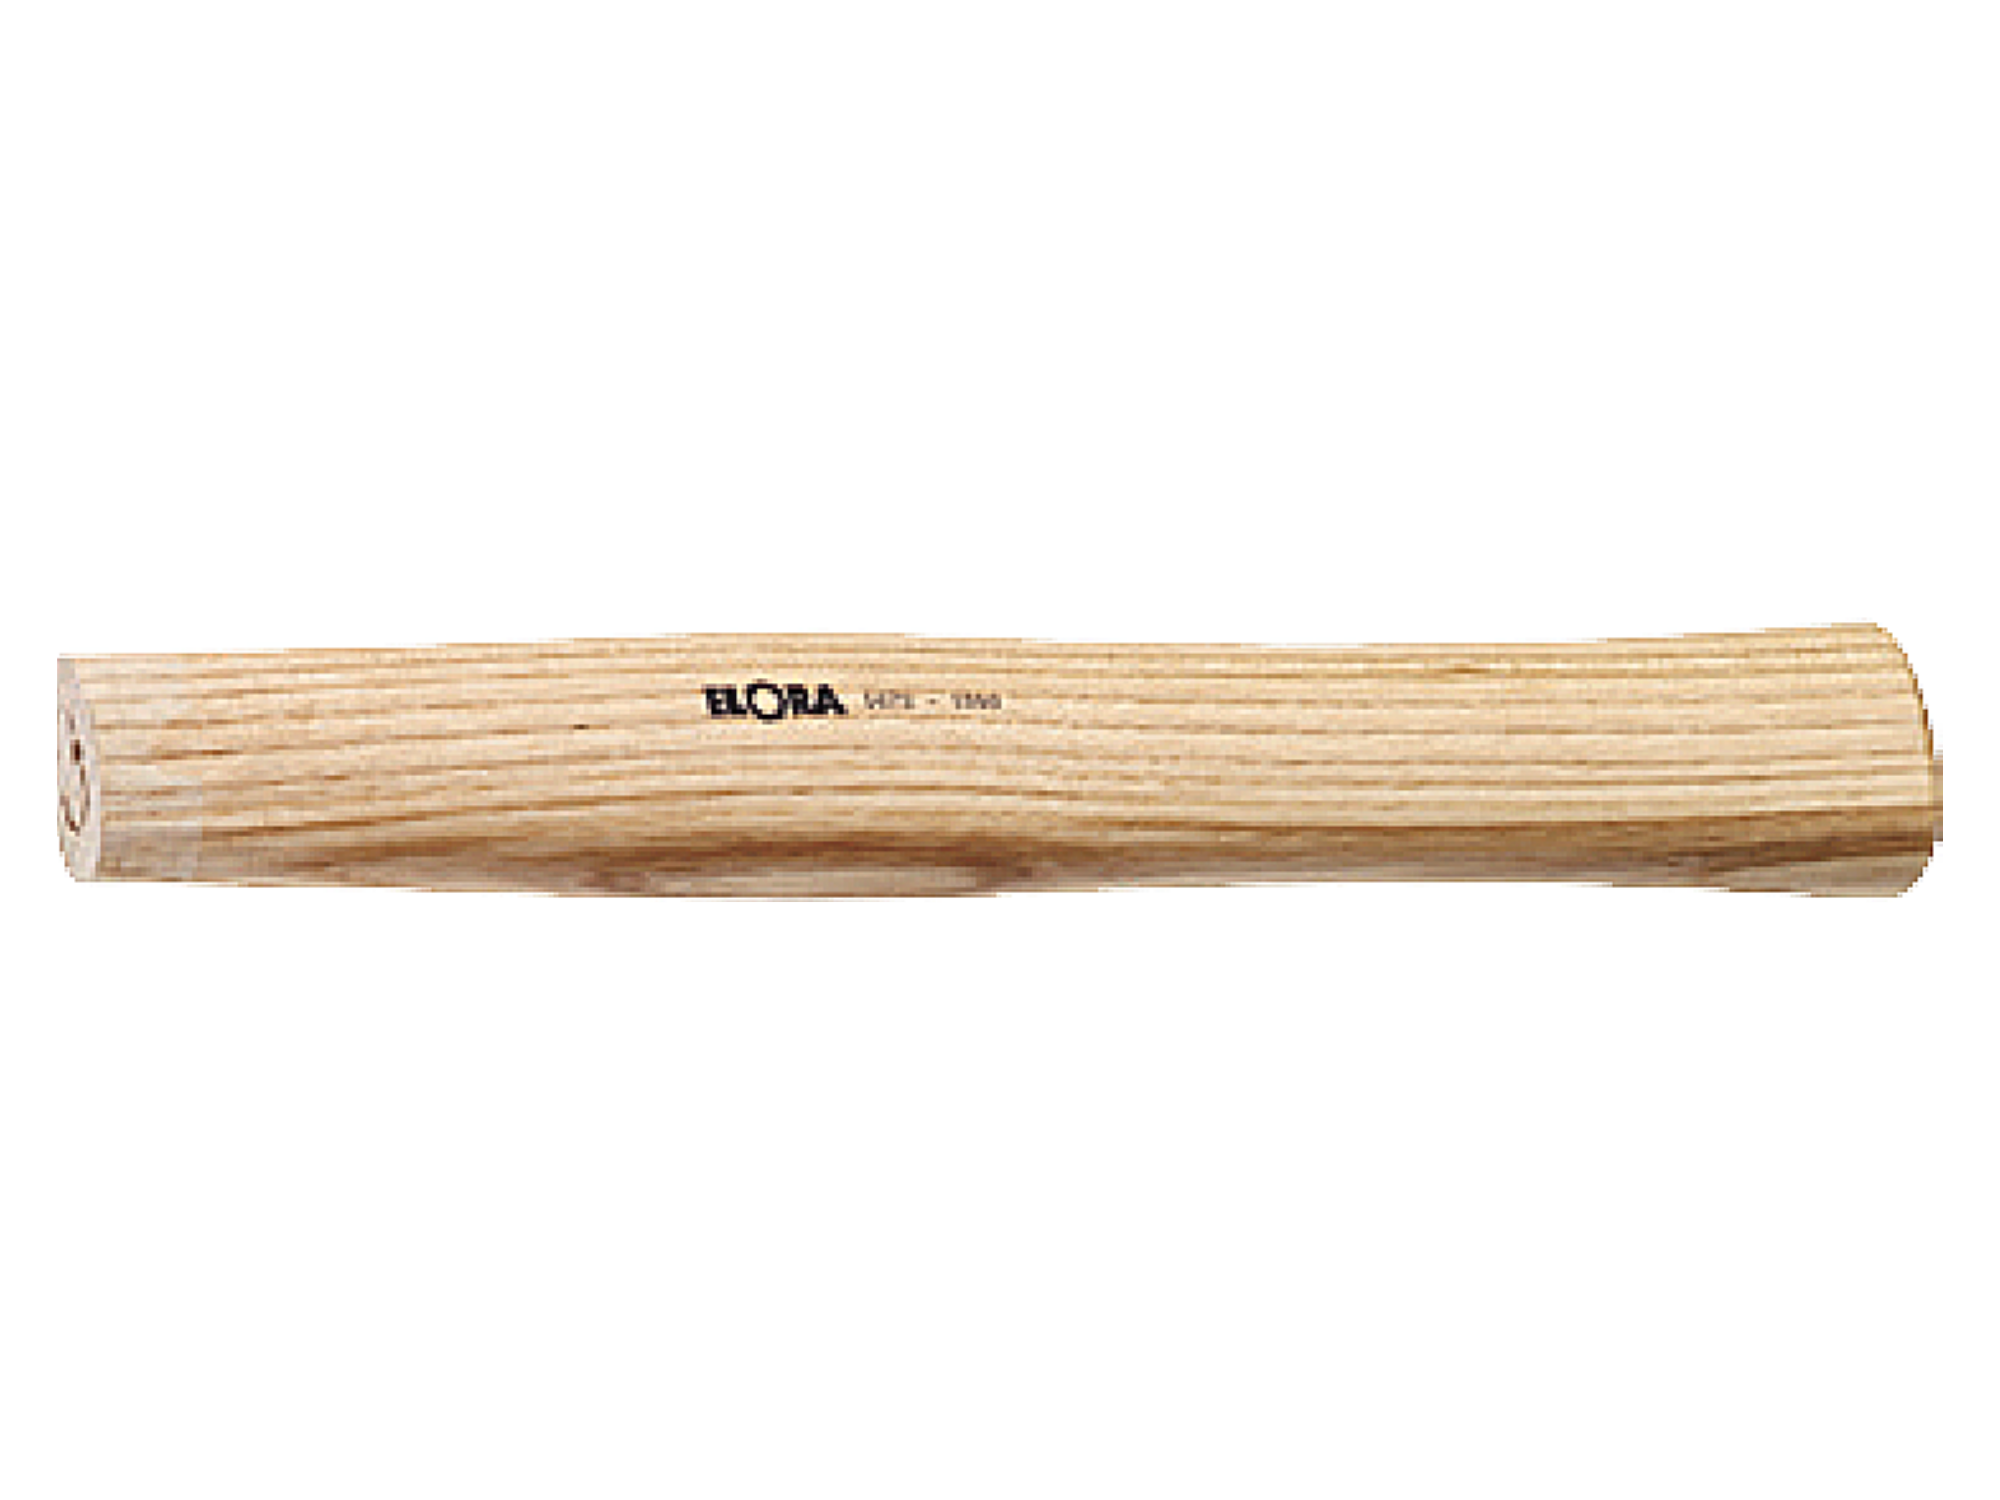 ELORA 1672ST Handle For Club Hammer (ELORA Tools) - Premium Club Hammer from ELORA - Shop now at Yew Aik.